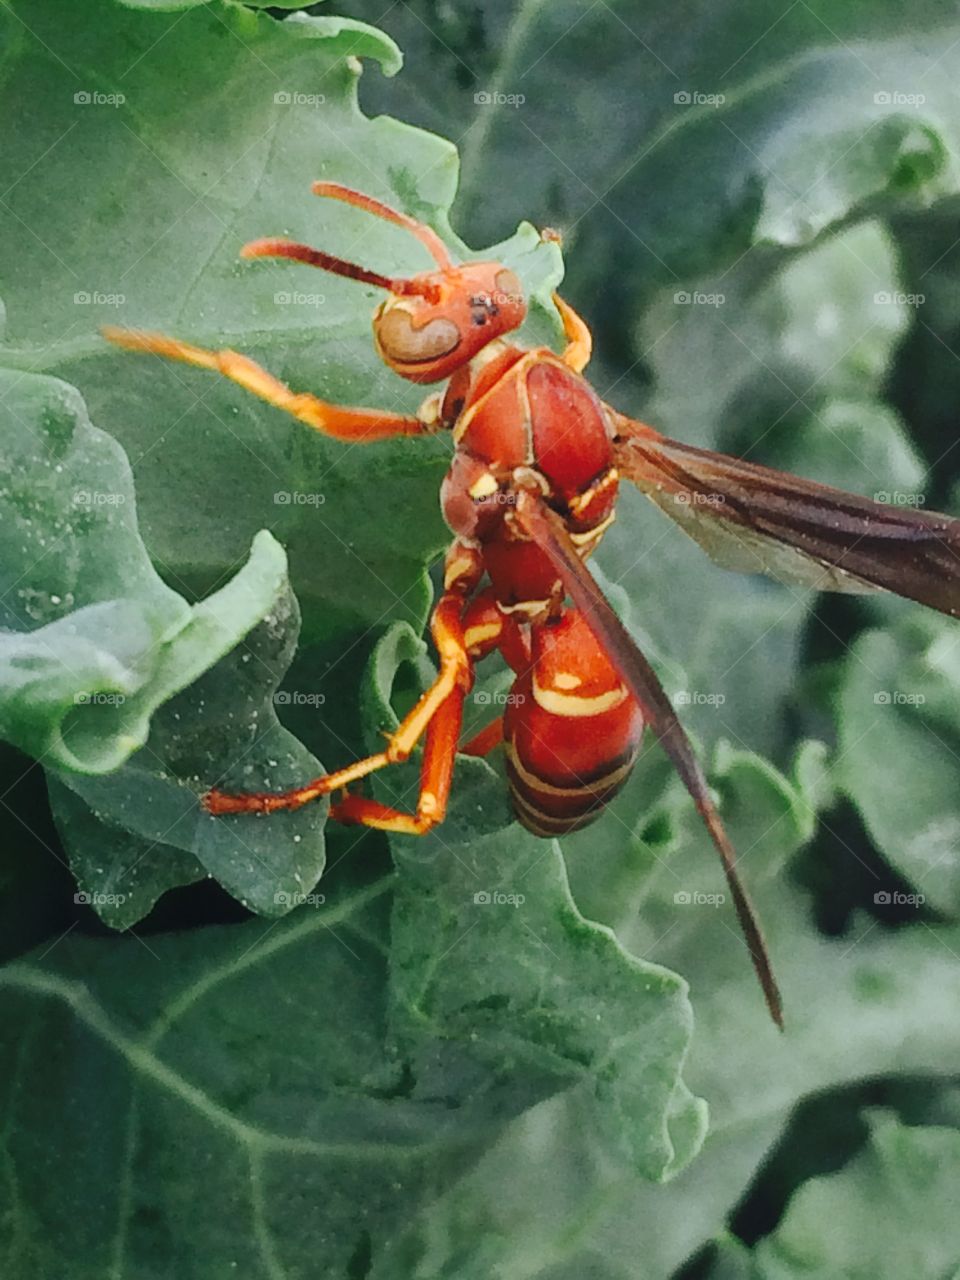 A paper wasp snacking on some Lettus 